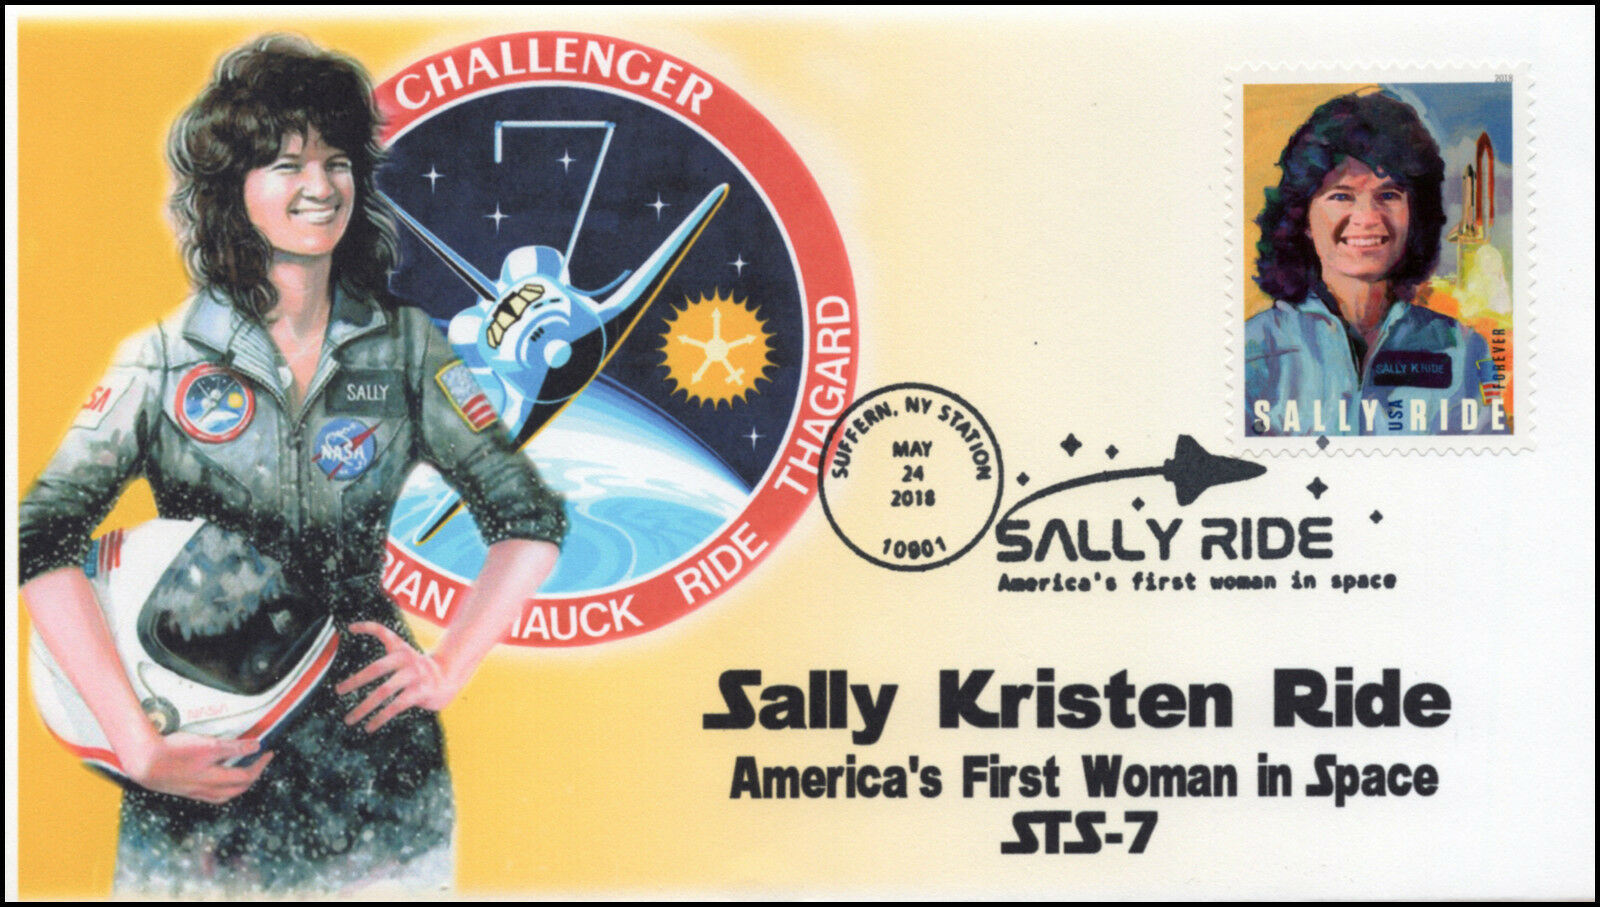 18-229, 2018, Sally Ride, Pictorial Postmark, Event Cover, Suffern Ny,